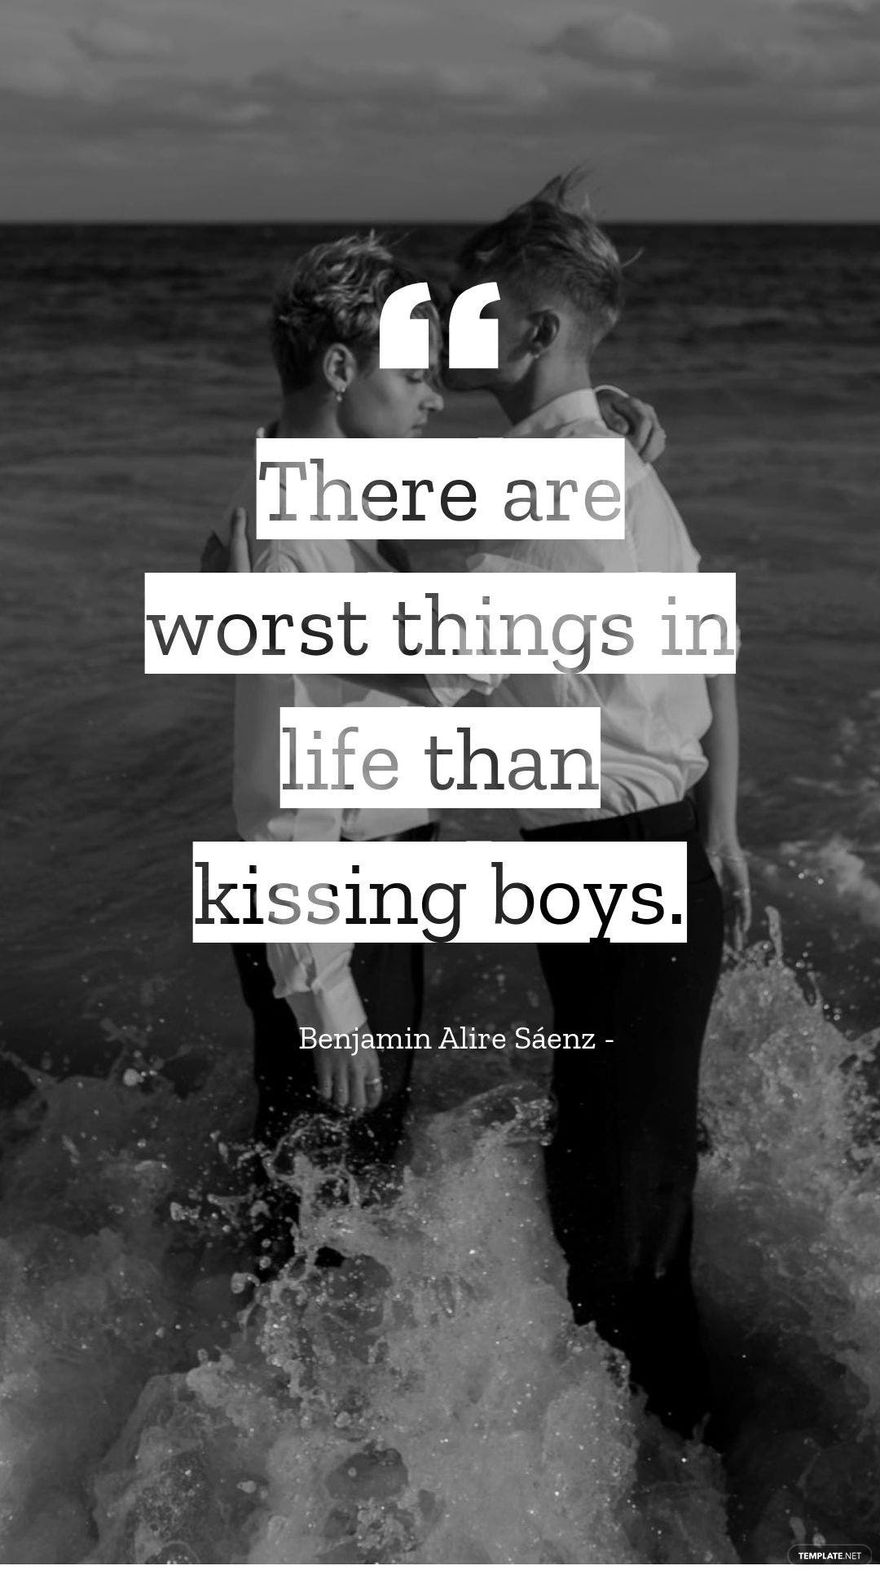 Benjamin Alire Sáenz - There are worst things in life than kissing boys.